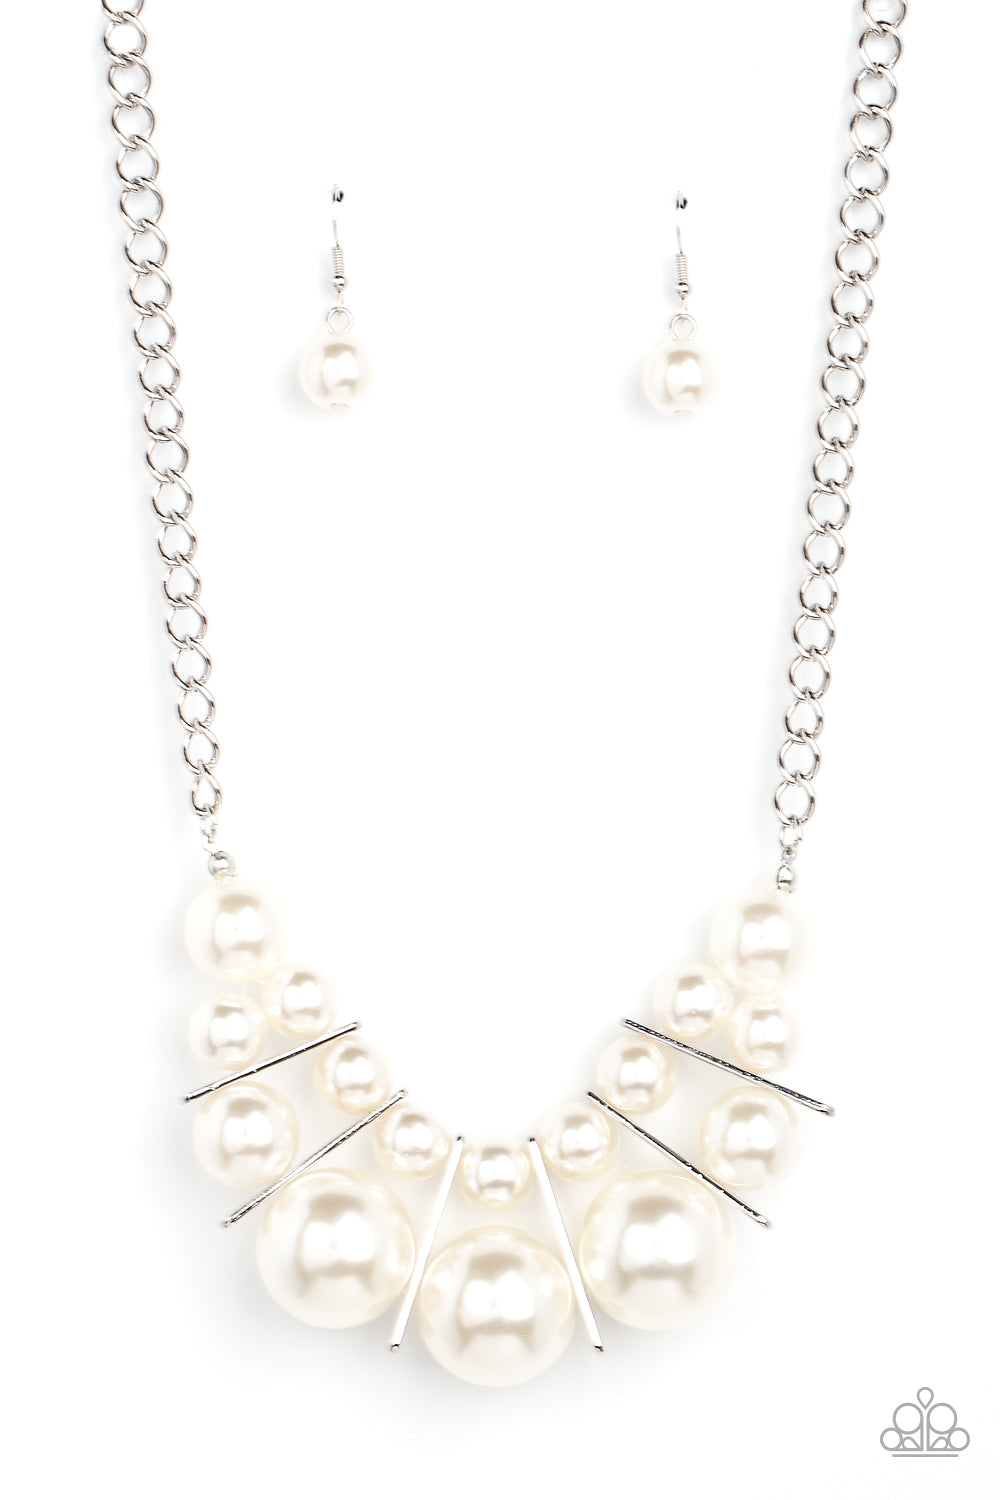 Challenge Accepted - white - Paparazzi necklace